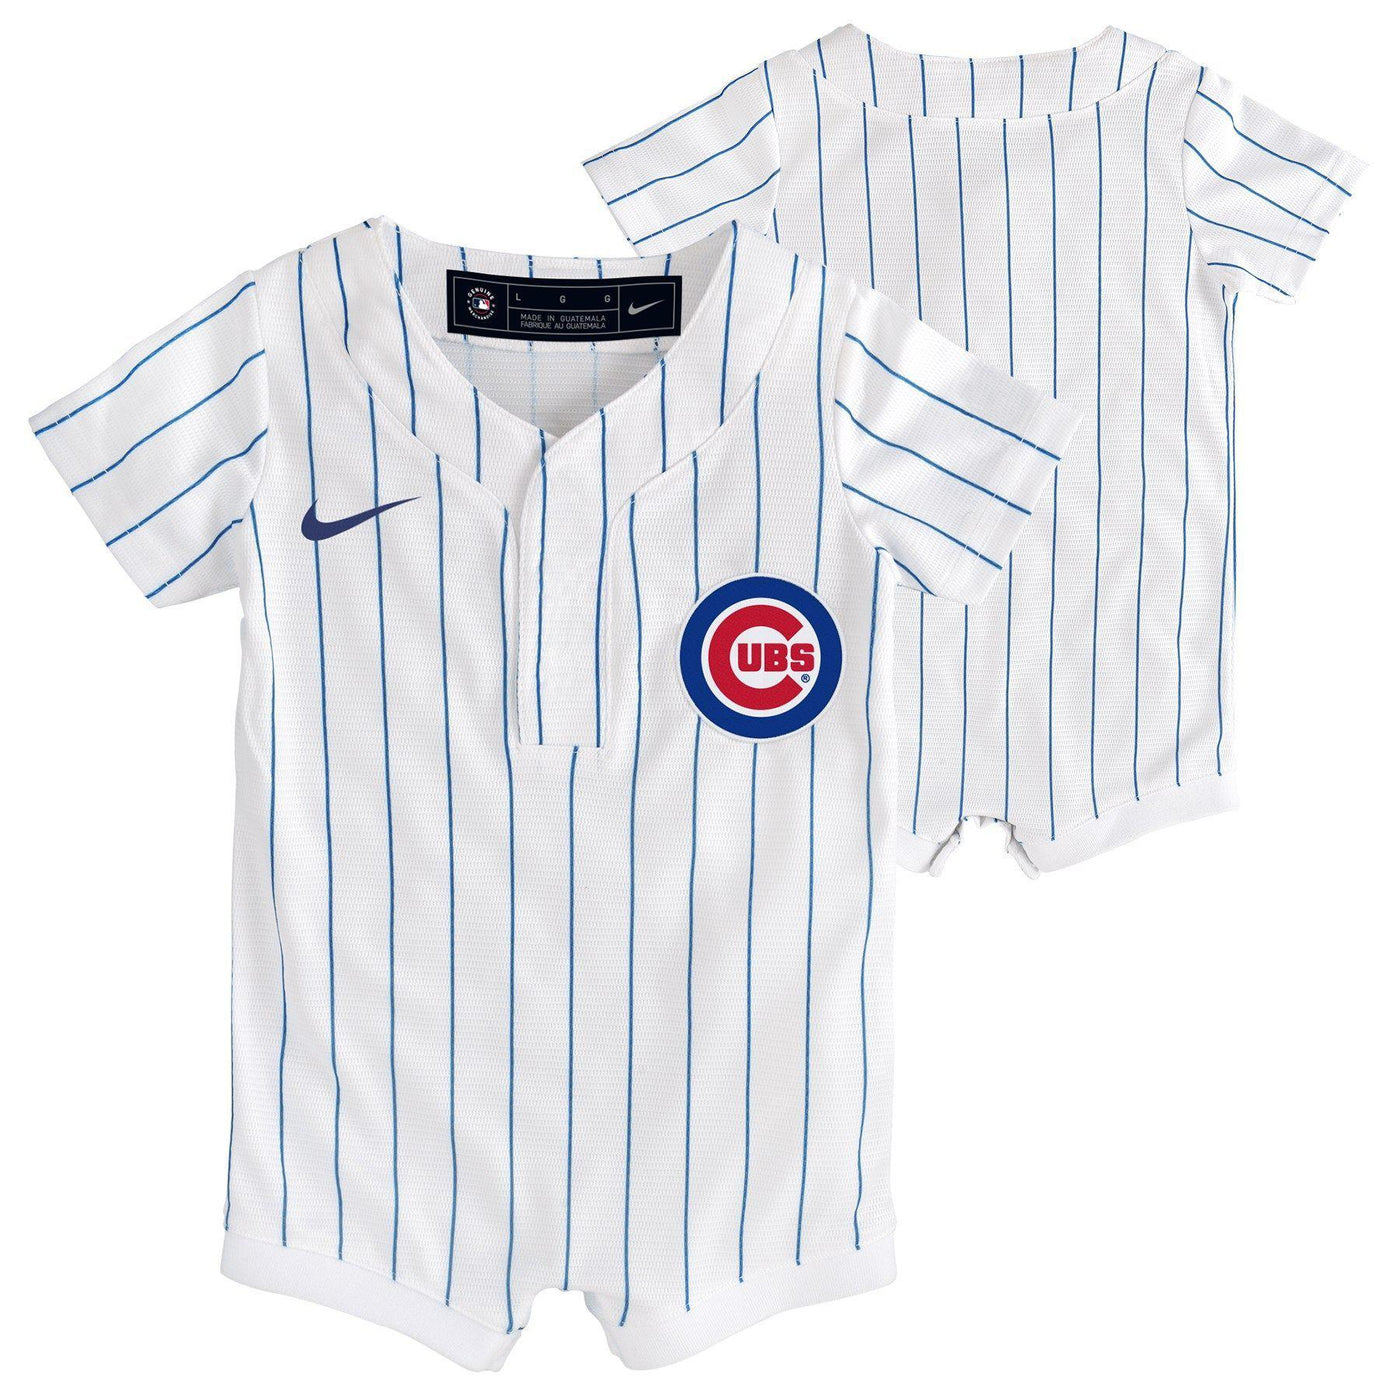 HOME JERSEY INFANT CHICAGO CUBS ONESIE - Ivy Shop